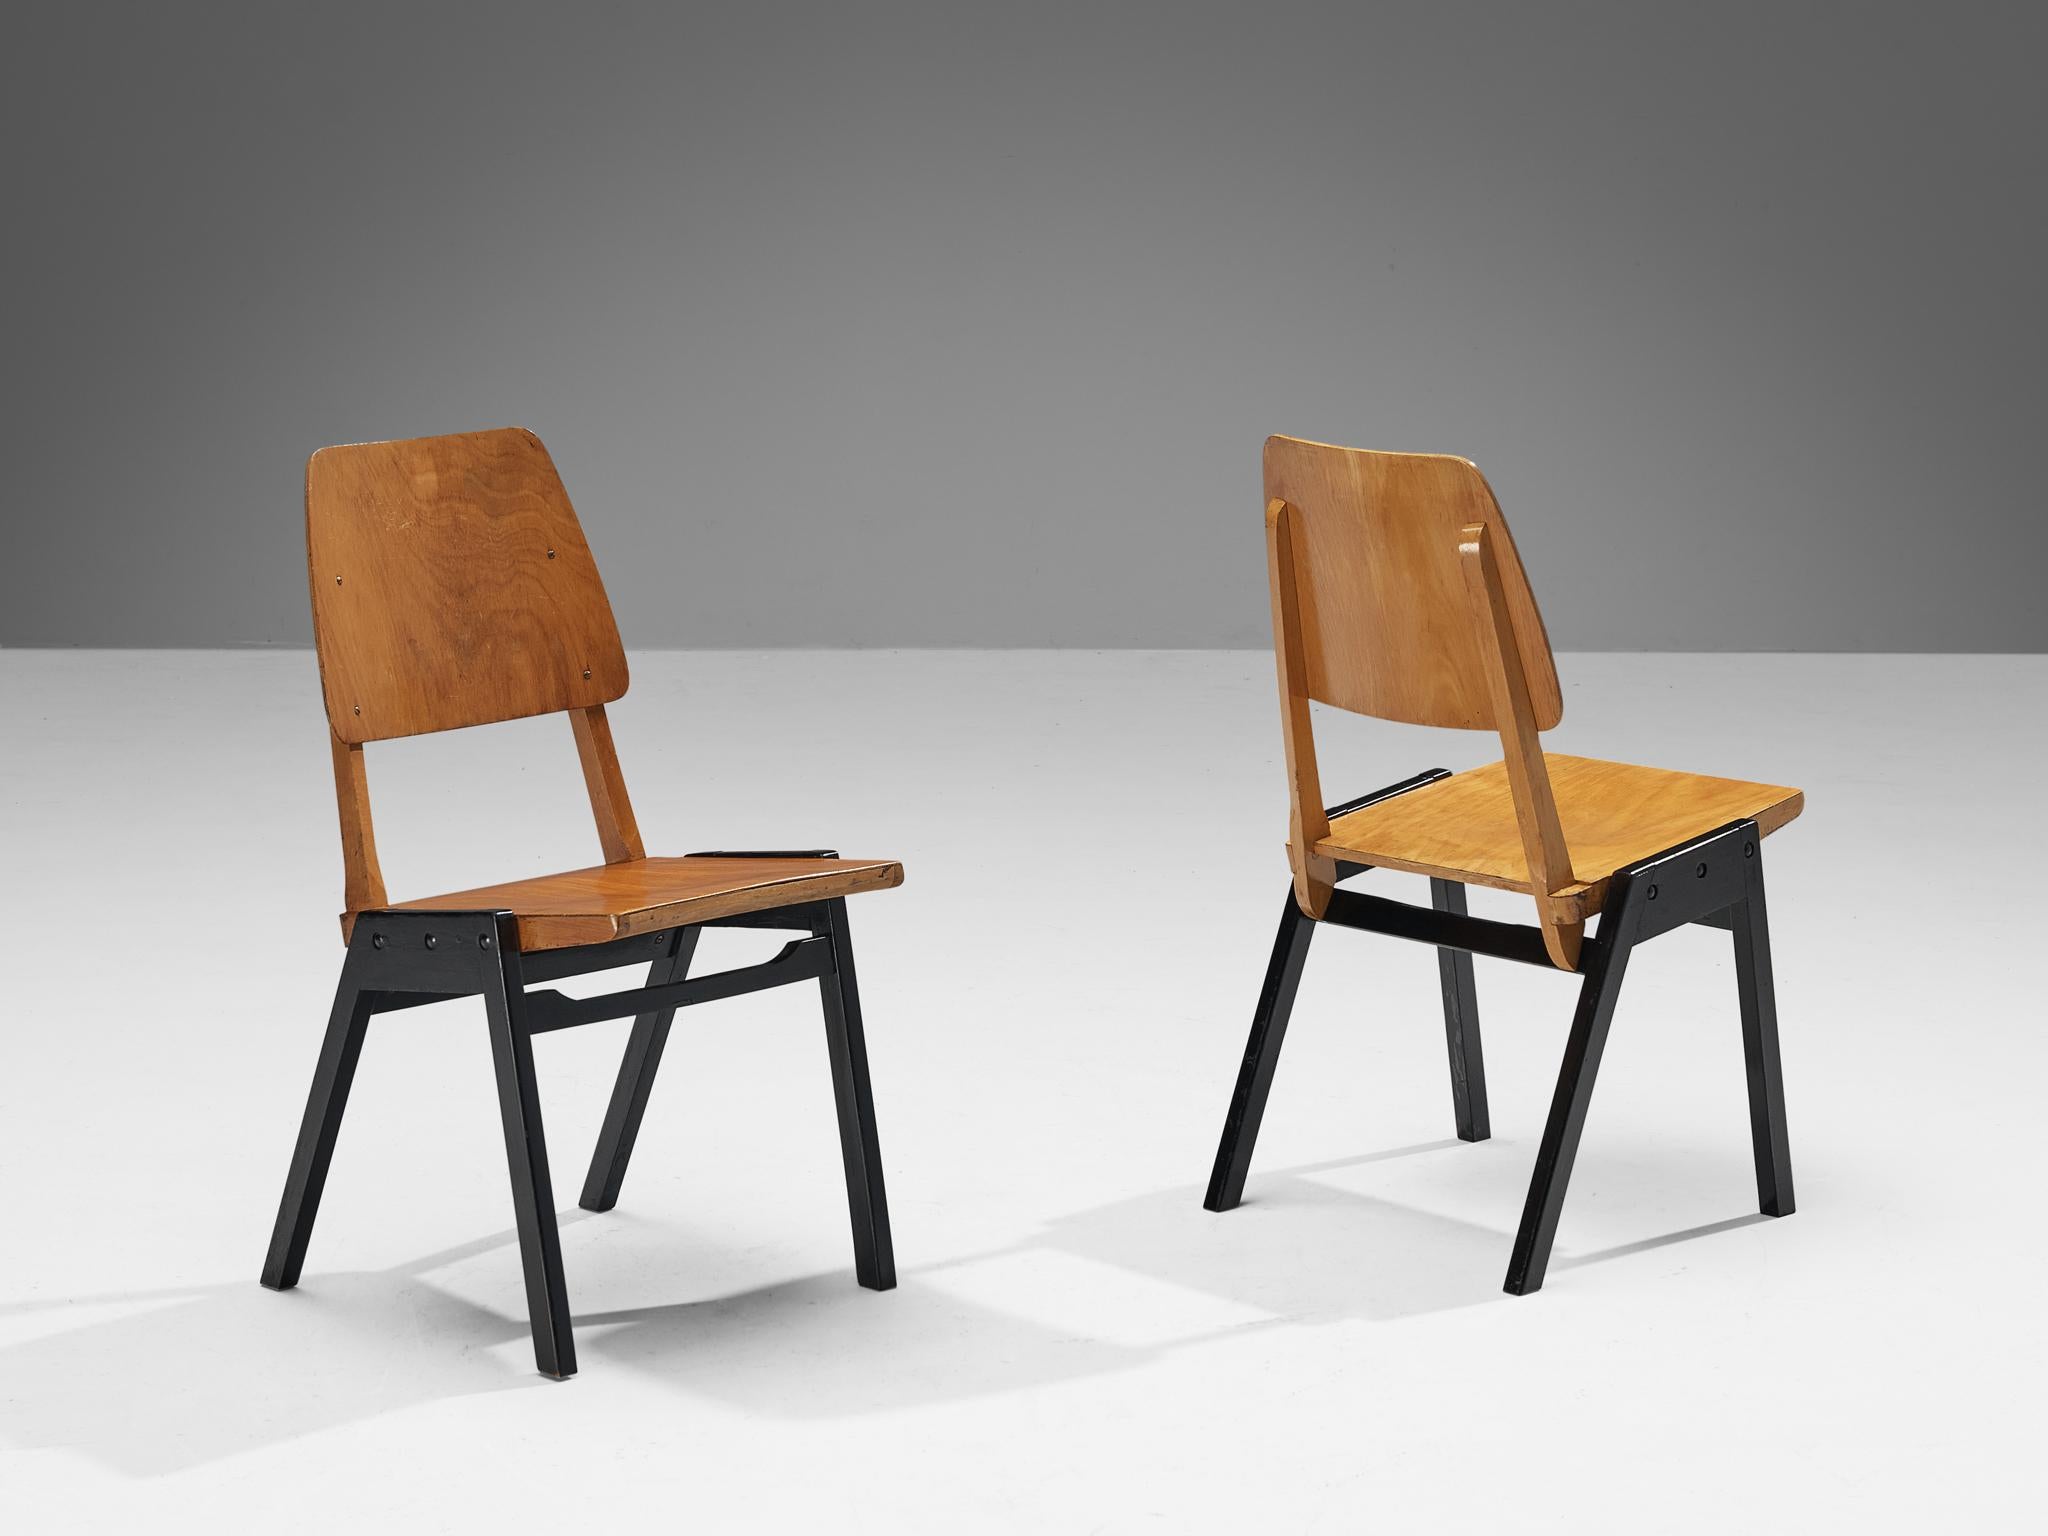 Roland Rainer, pair of dining chairs, stained beech, lacquered beech, Austria, 1950s.

These dining chairs have a minimalistic design, distinguished by an open construction style with emphasis on constructive details. The combination of the blond